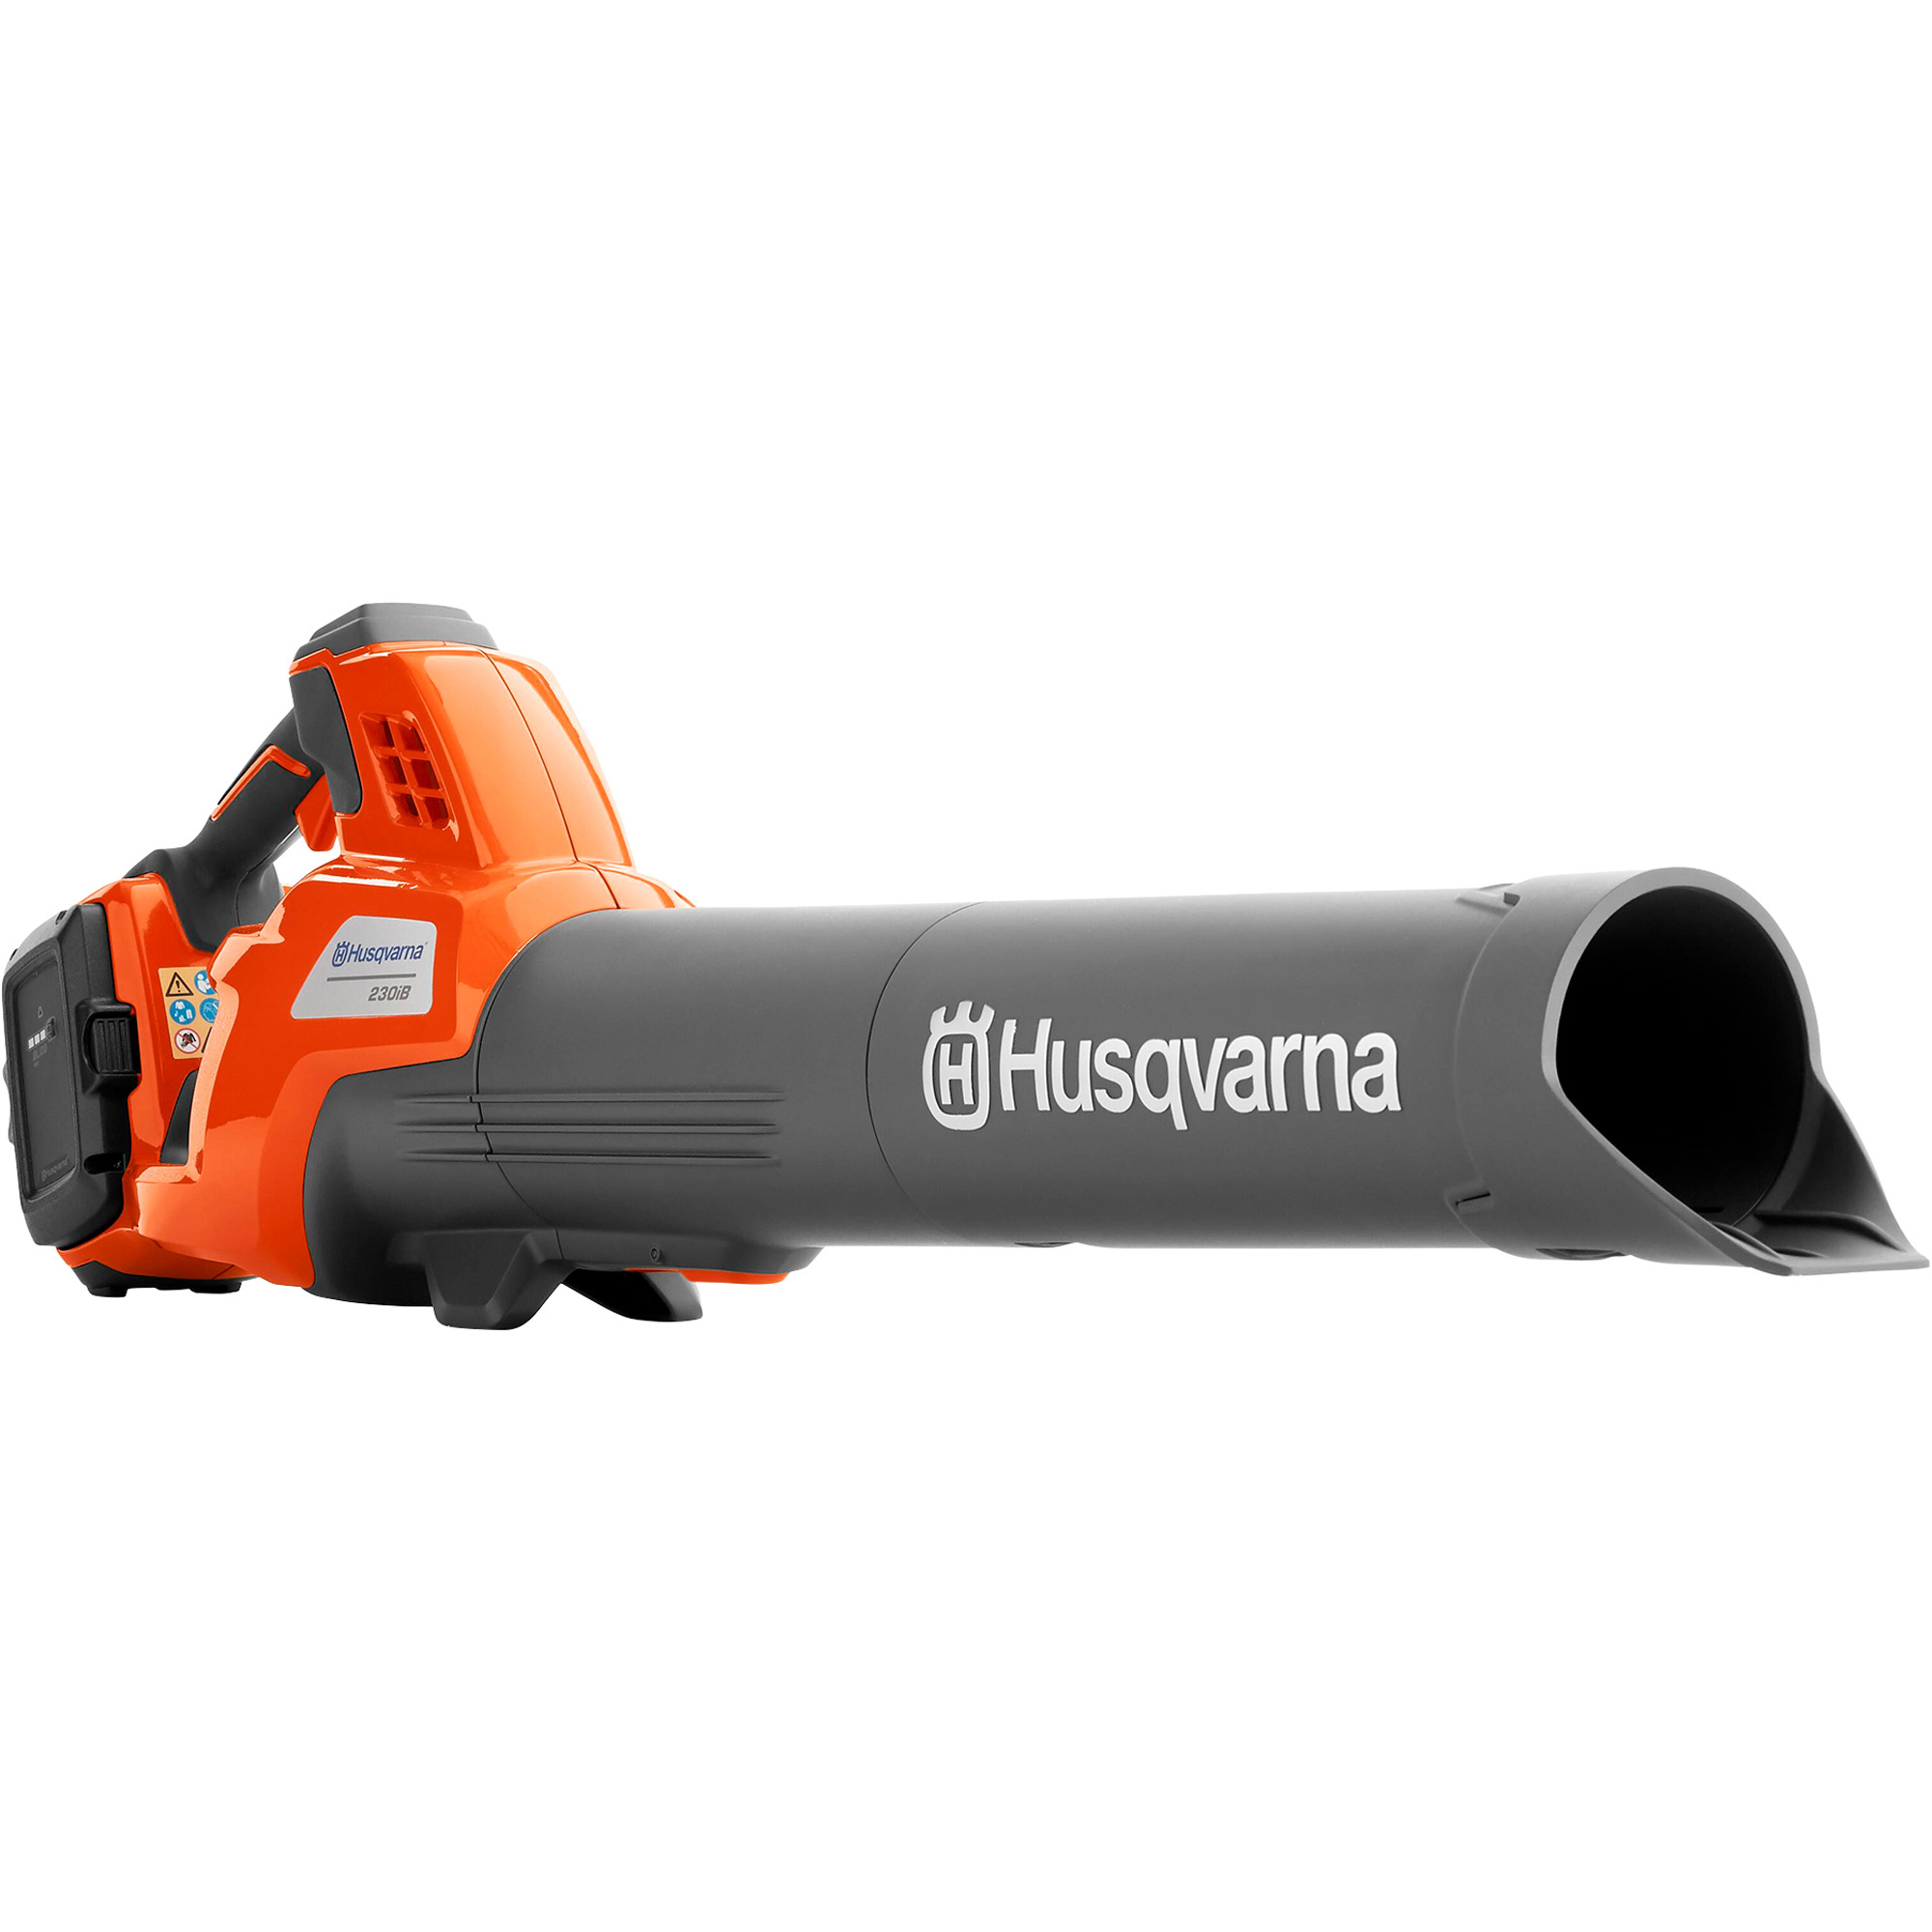 Husqvarna 230iB Cordless Leaf Blower, 650 CFM, Includes Battery and Charger, Model 230iB